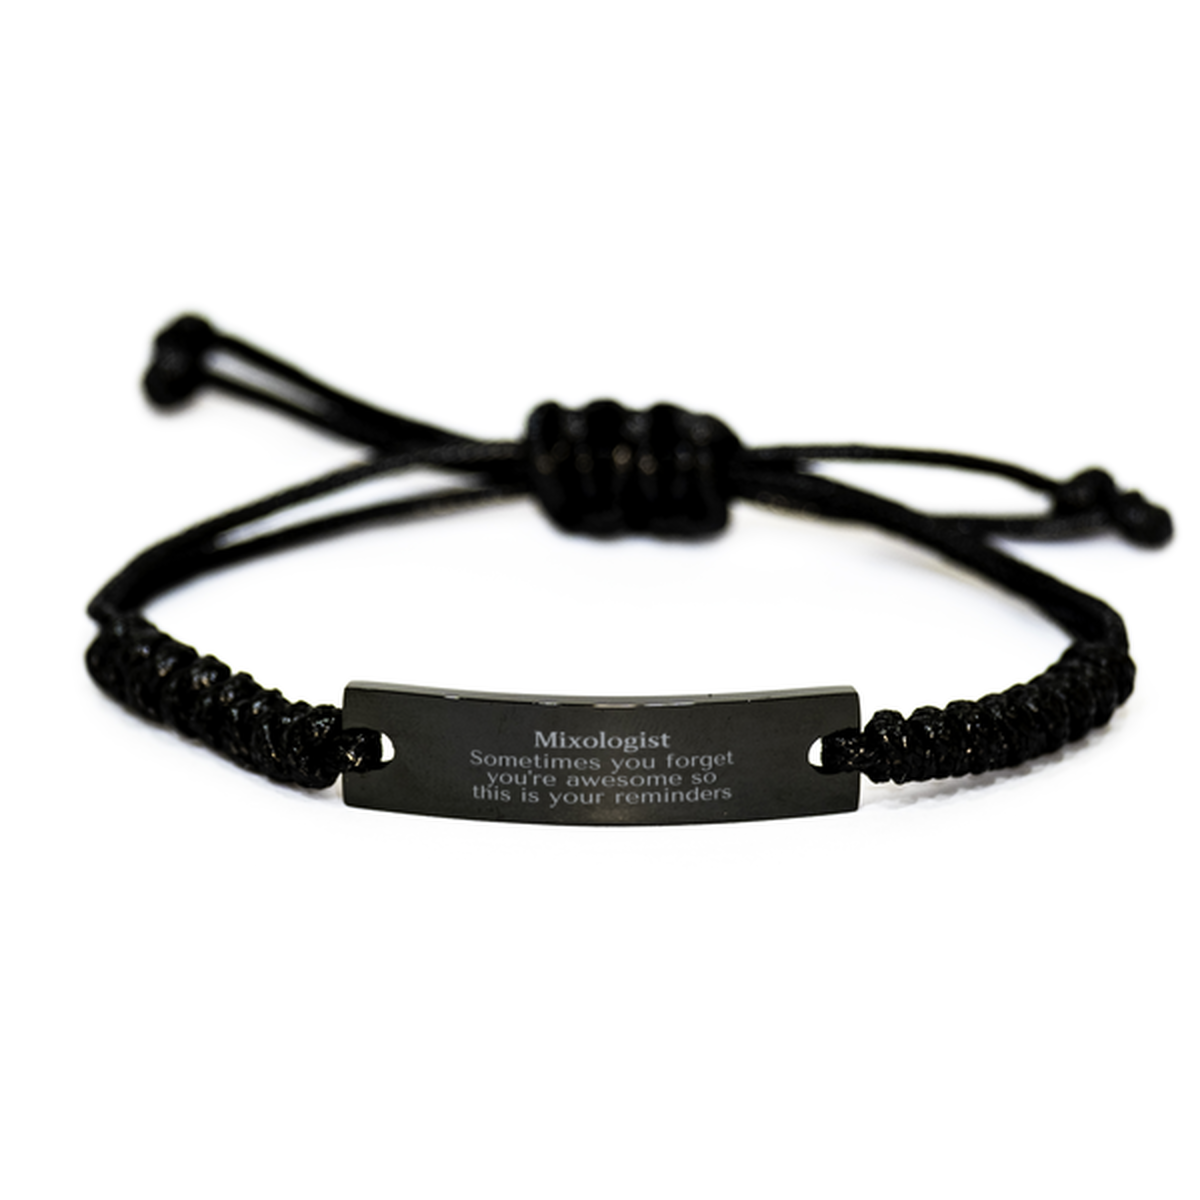 Sentimental Mixologist Black Rope Bracelet, Mixologist Sometimes you forget you're awesome so this is your reminders, Graduation Christmas Birthday Gifts for Mixologist, Men, Women, Coworkers